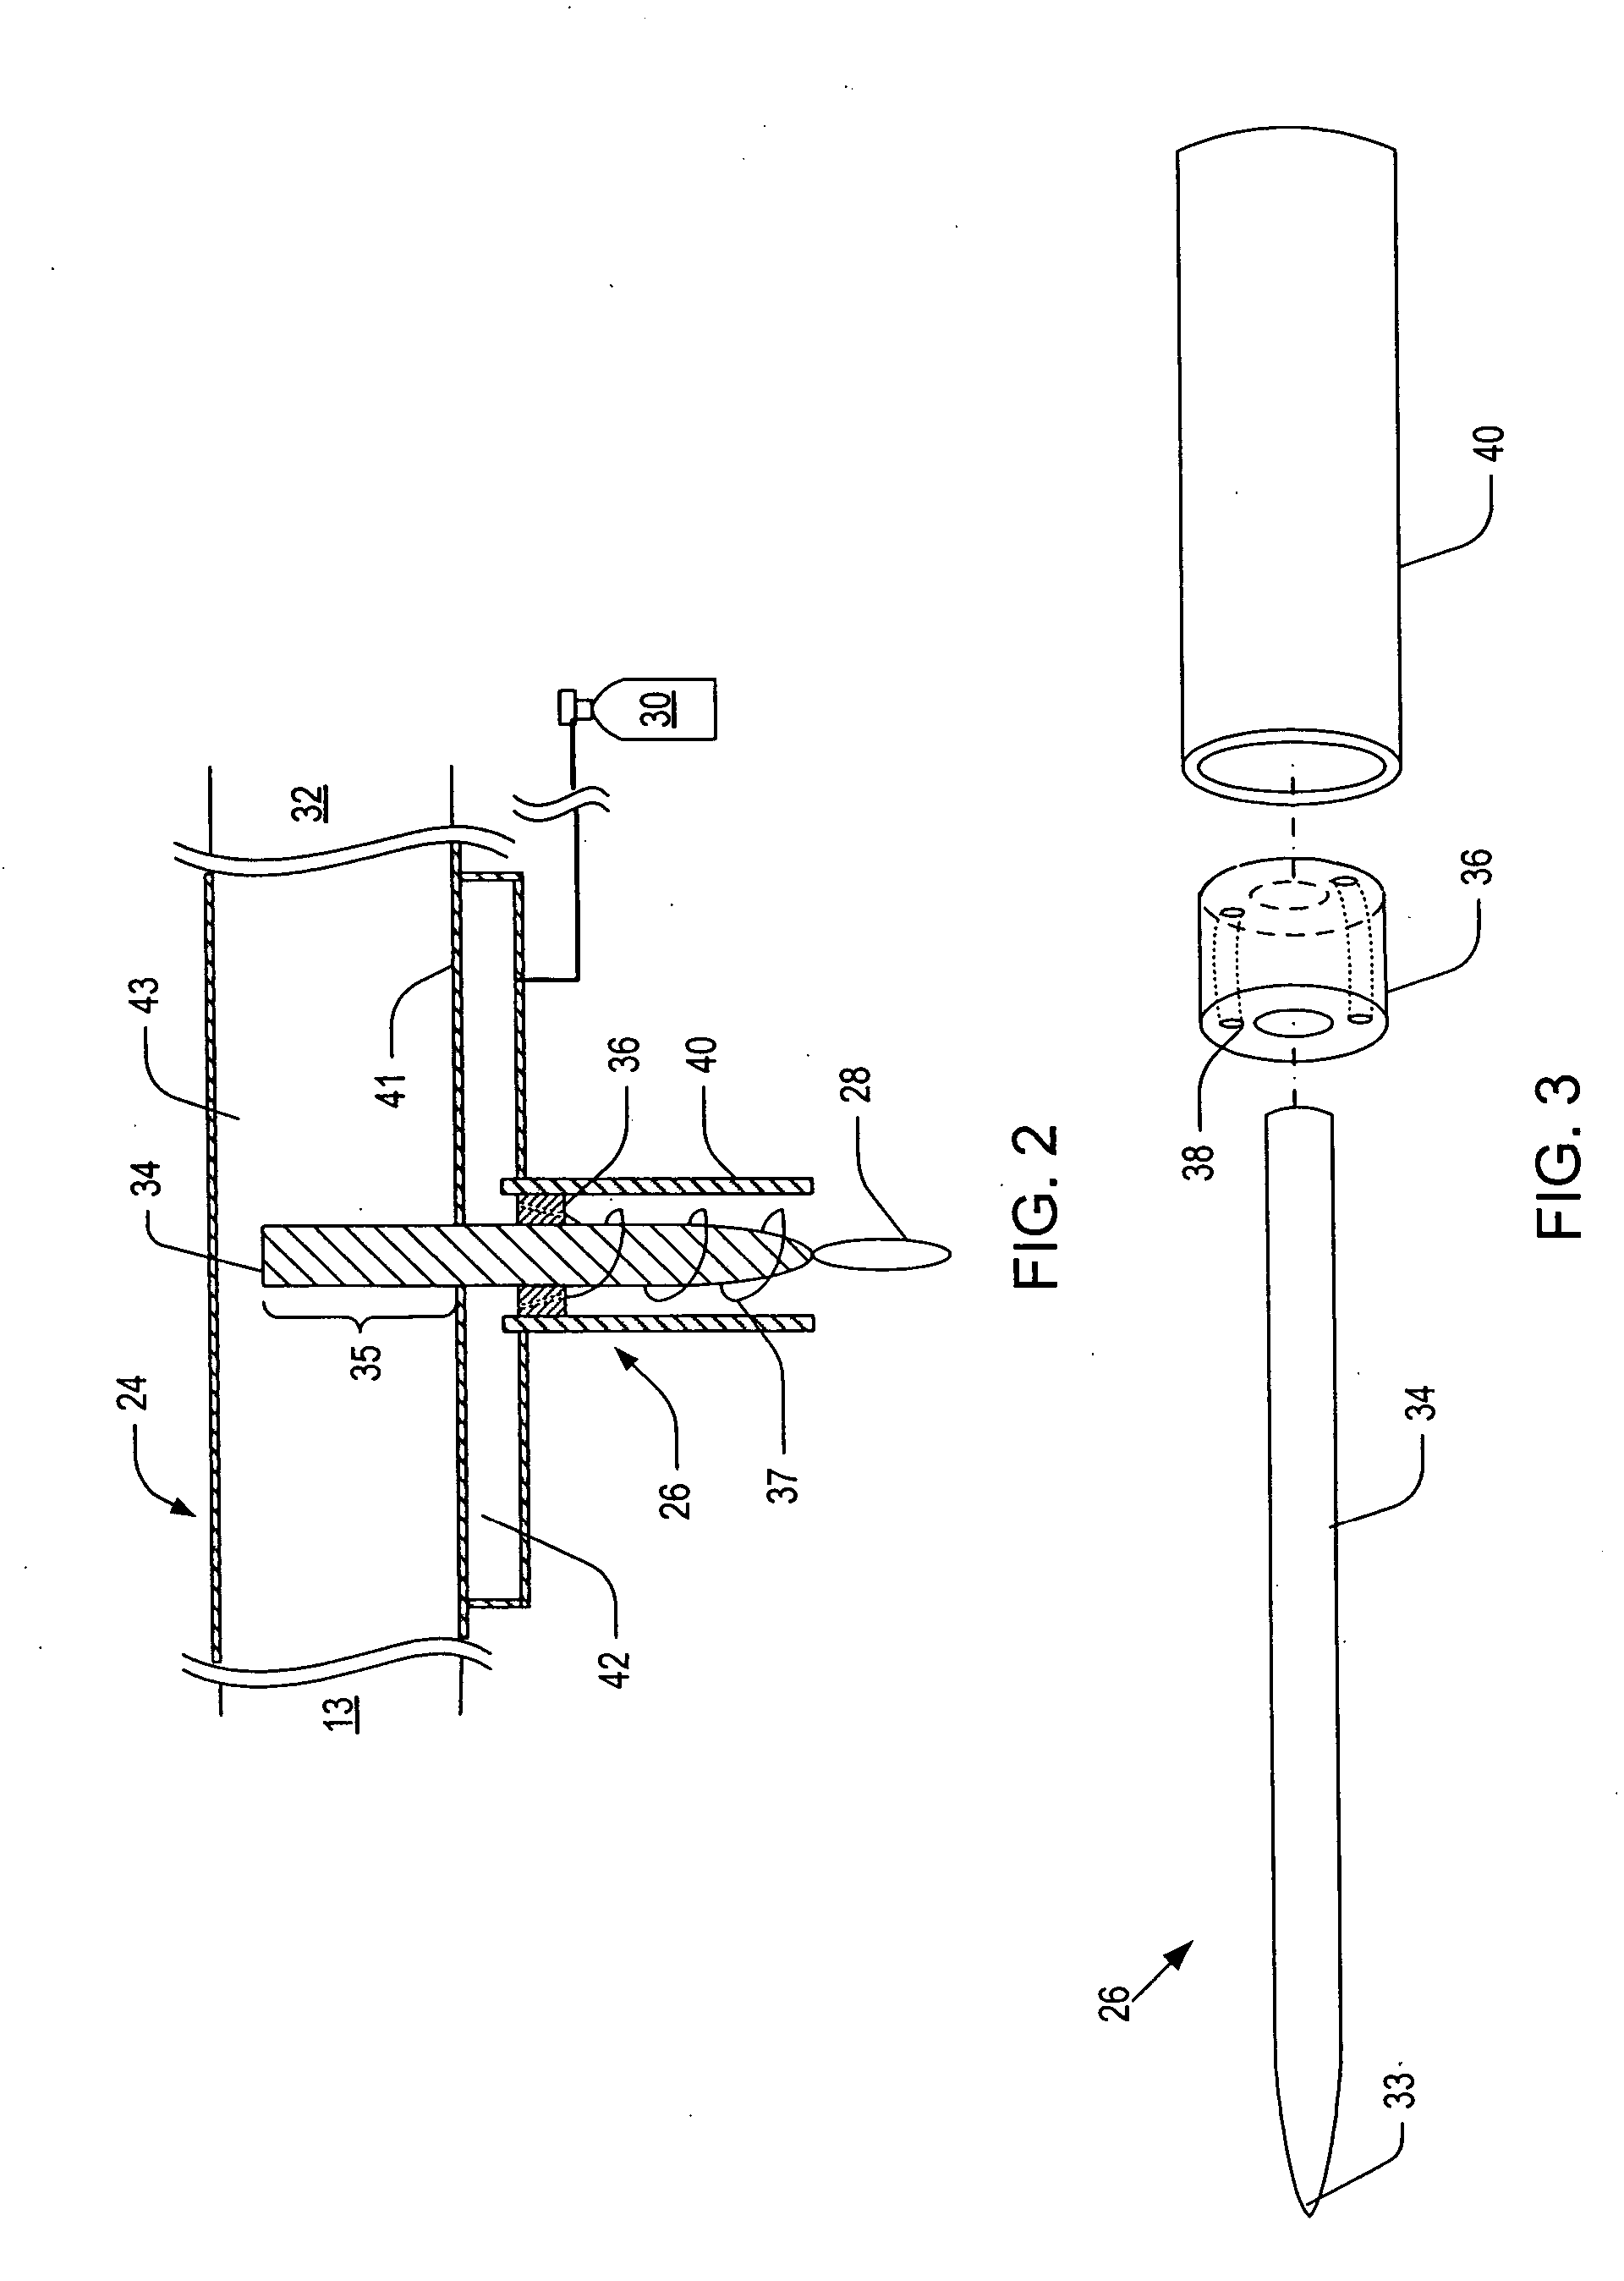 Microwave plasma nozzle with enhanced plume stability and heating efficiency